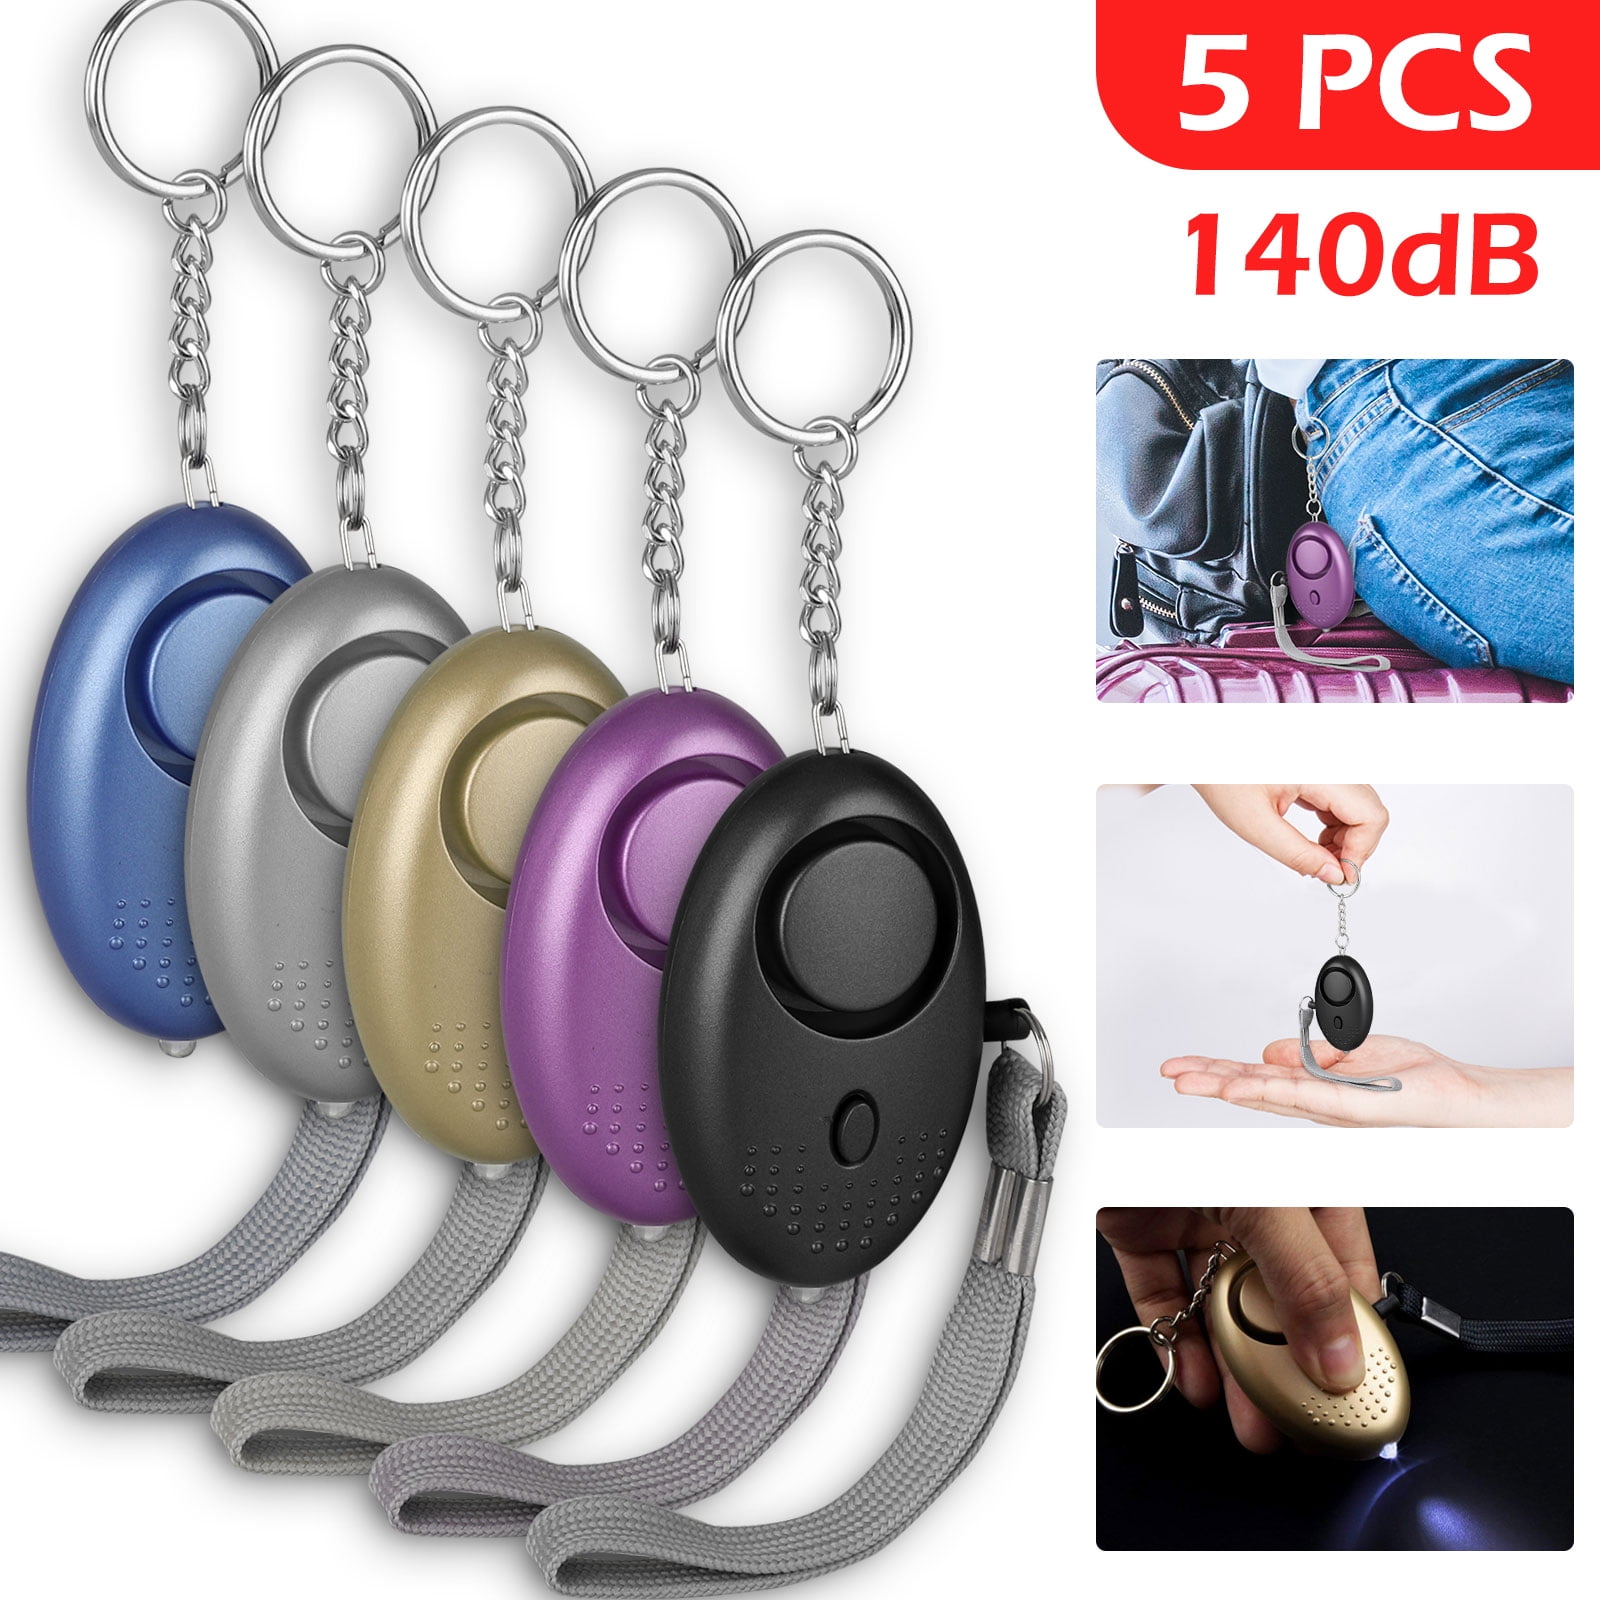 5x Self Defense Alarm 140dB Alert Keychain Safety Personal Security for Women 